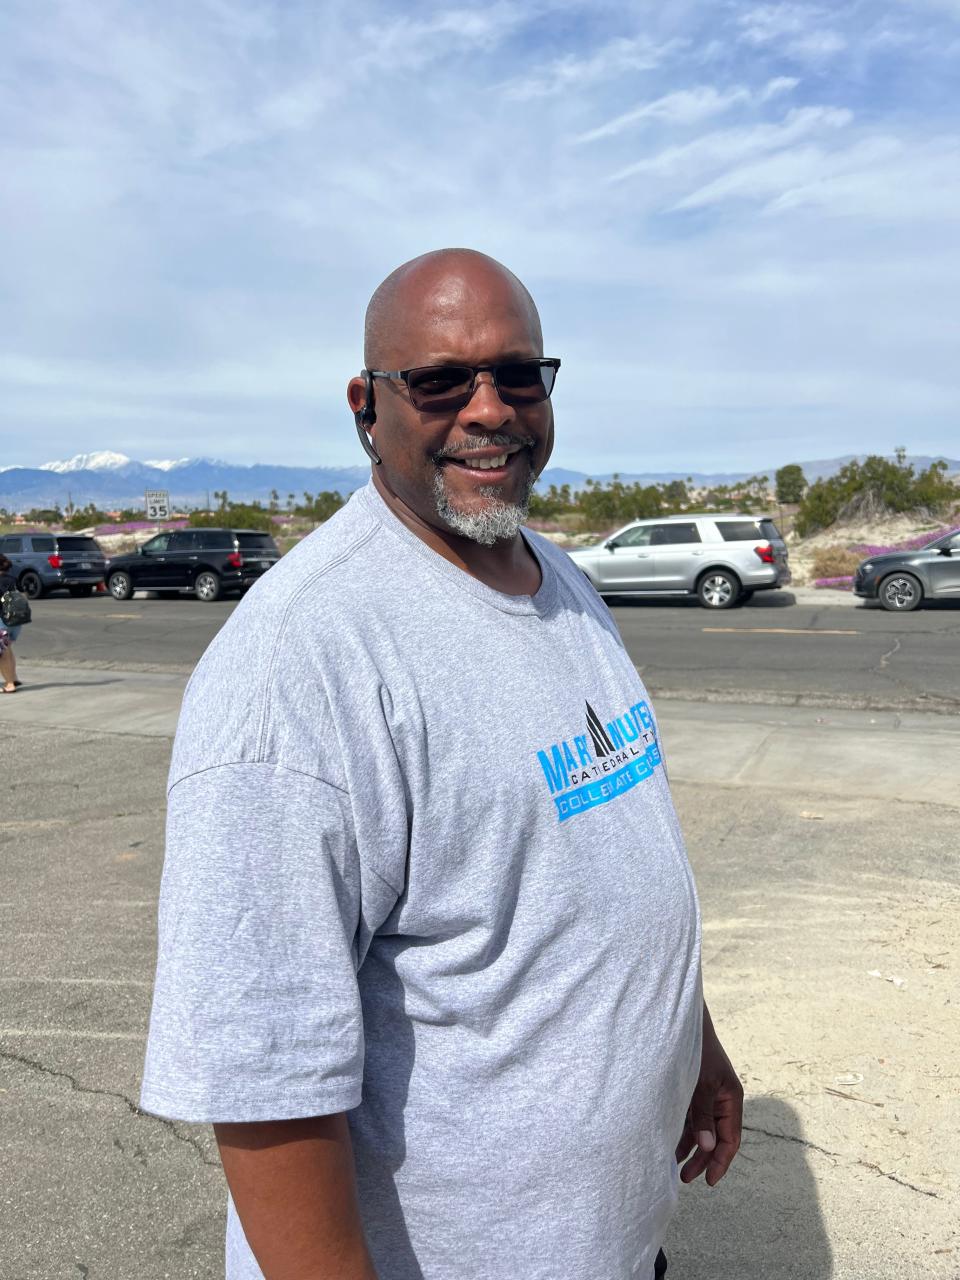 At last week's Mary Nutter Collegiate Classic in Cathedral City, Calif., former OU defensive lineman Tyrone Rodgers manned the team drop-off gate. Rodgers, a high school teammate of Jamelle Hollieway